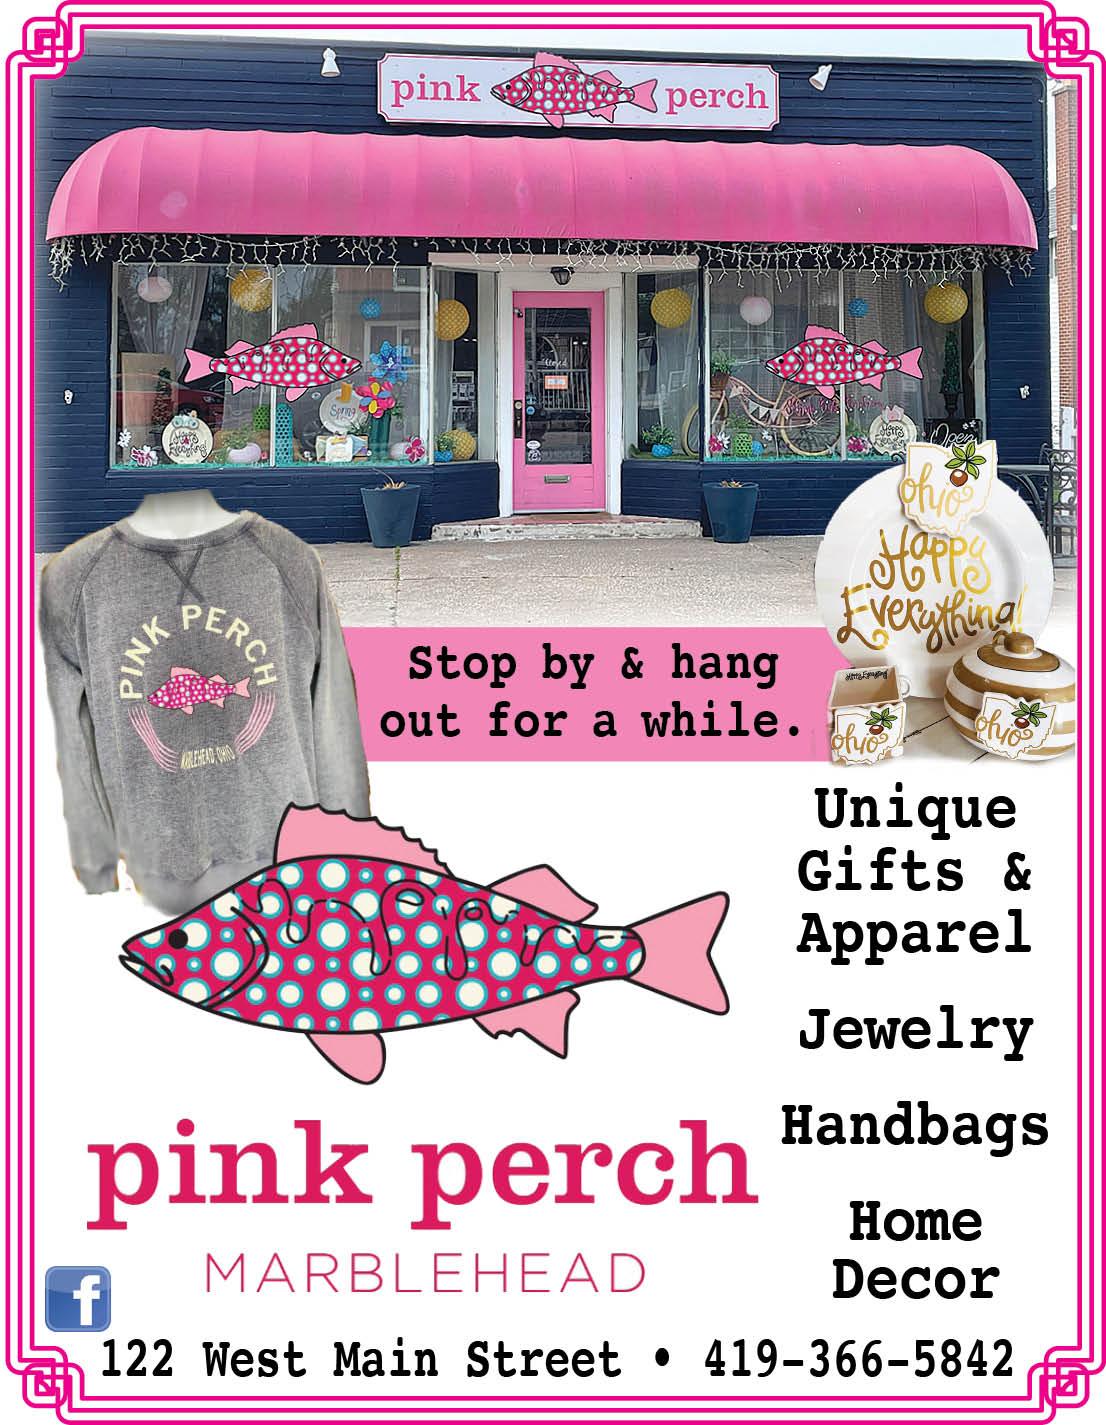 The Pink Perch